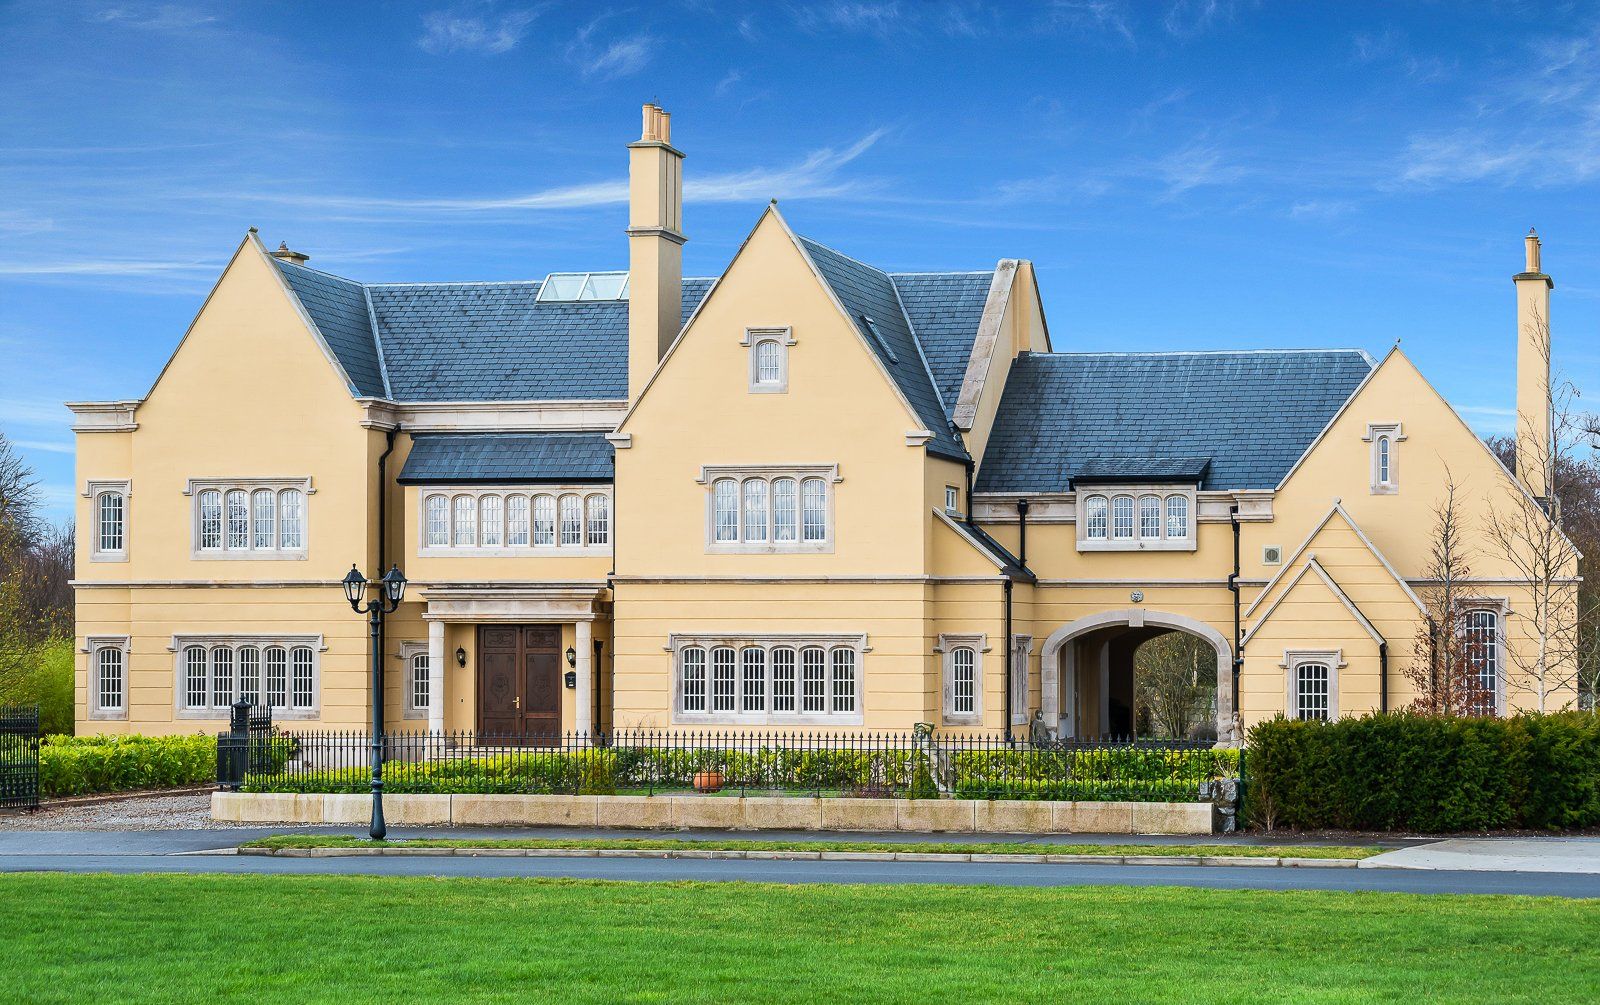 5-Star villa on the grounds of world-famous Adare Manor.